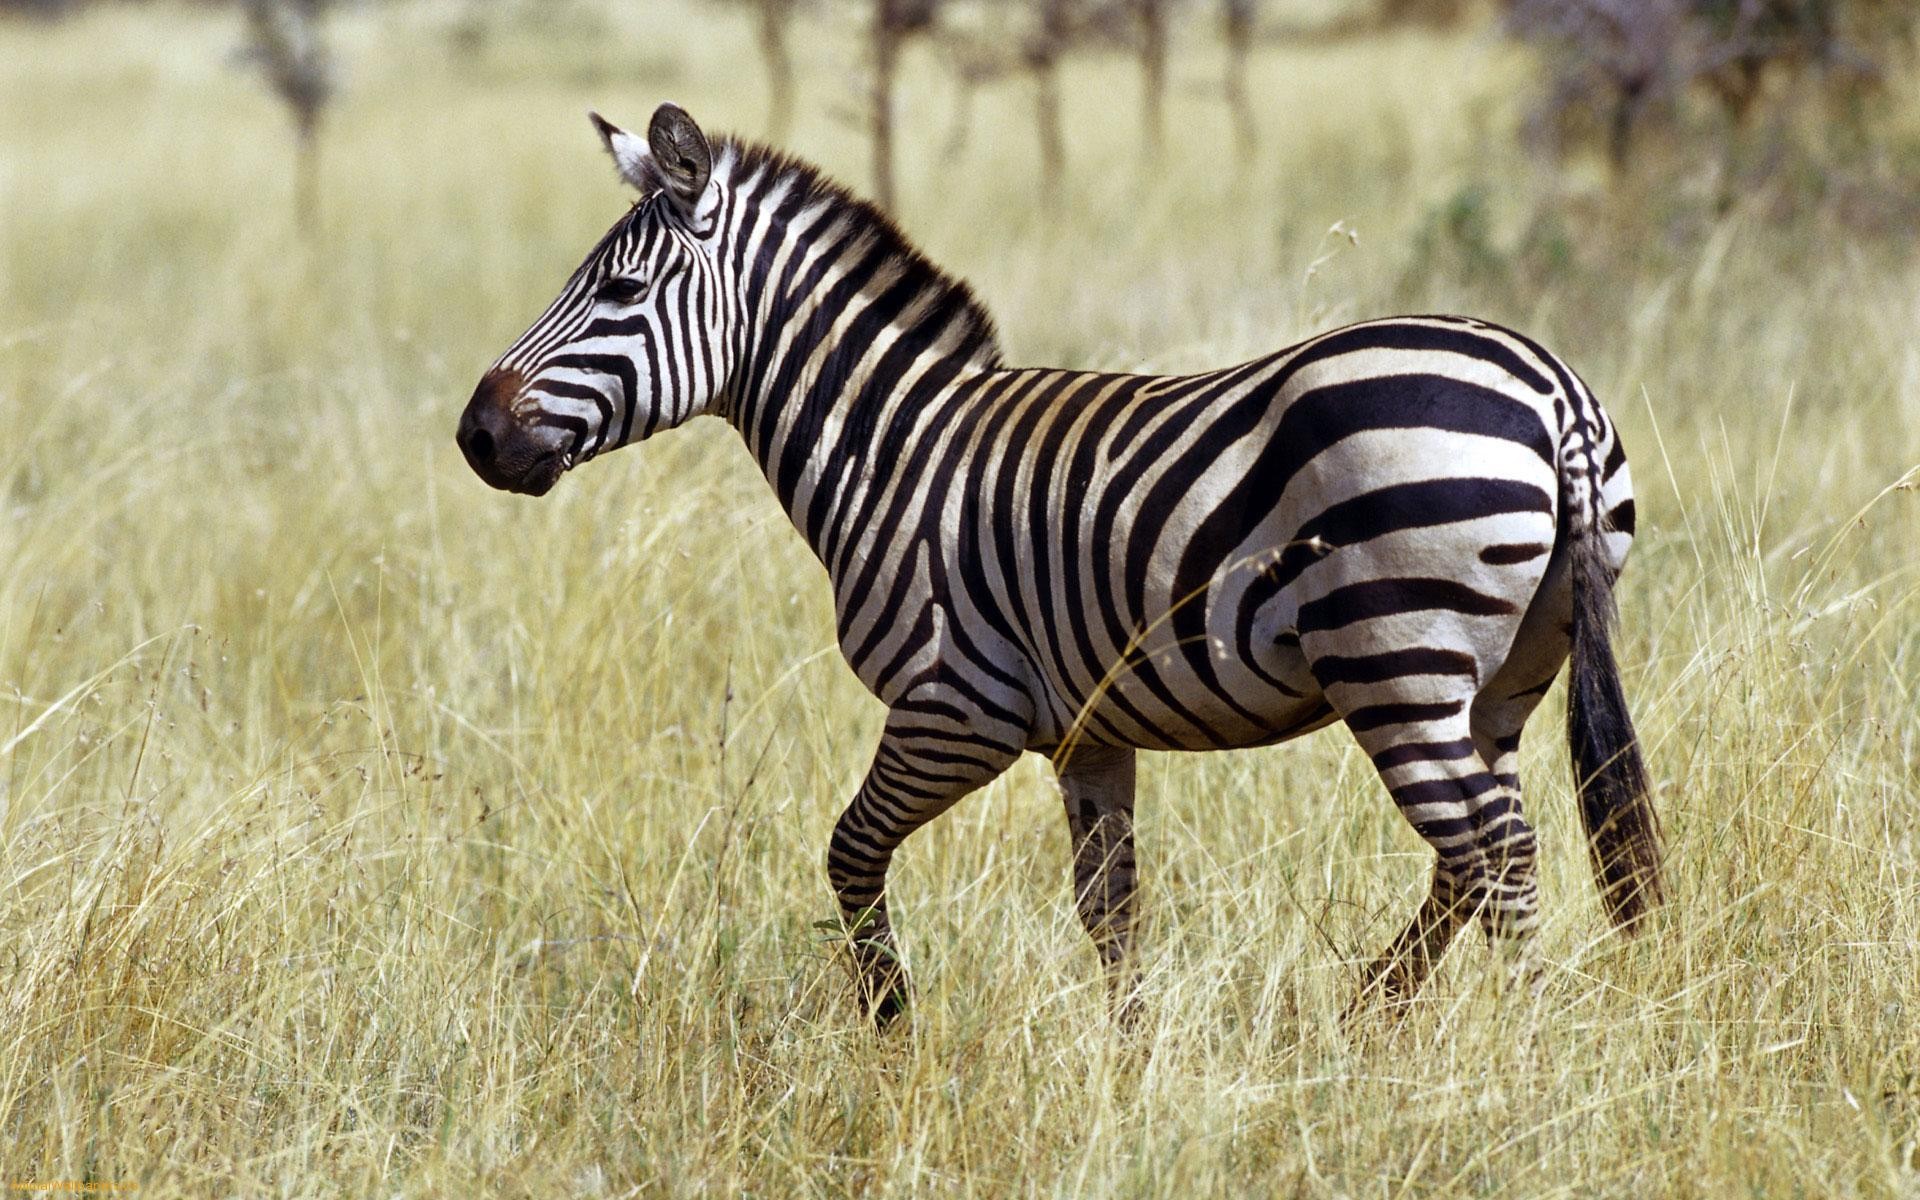 Zebra Backgrounds Free | Wallpapers, Backgrounds, Images, Art Photos.